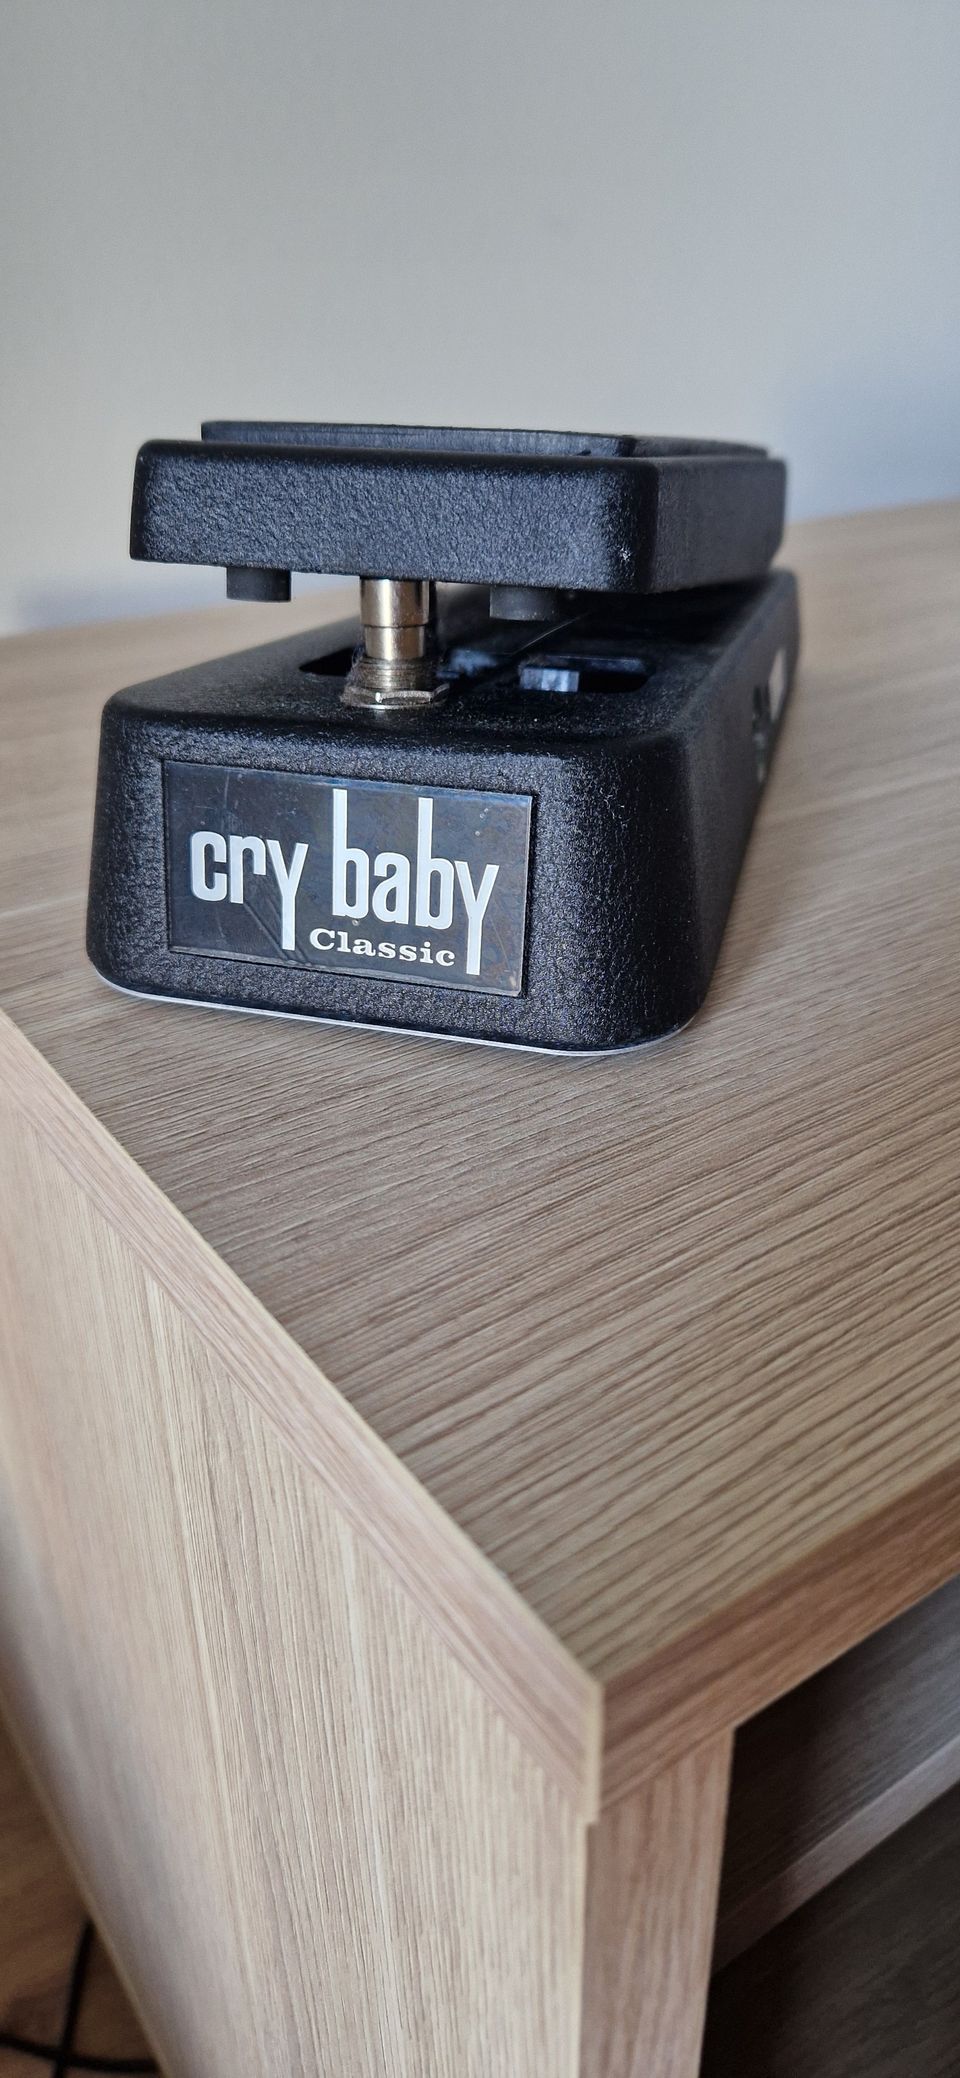 DUNLOP GCB95F CRY BABY CLASSIC